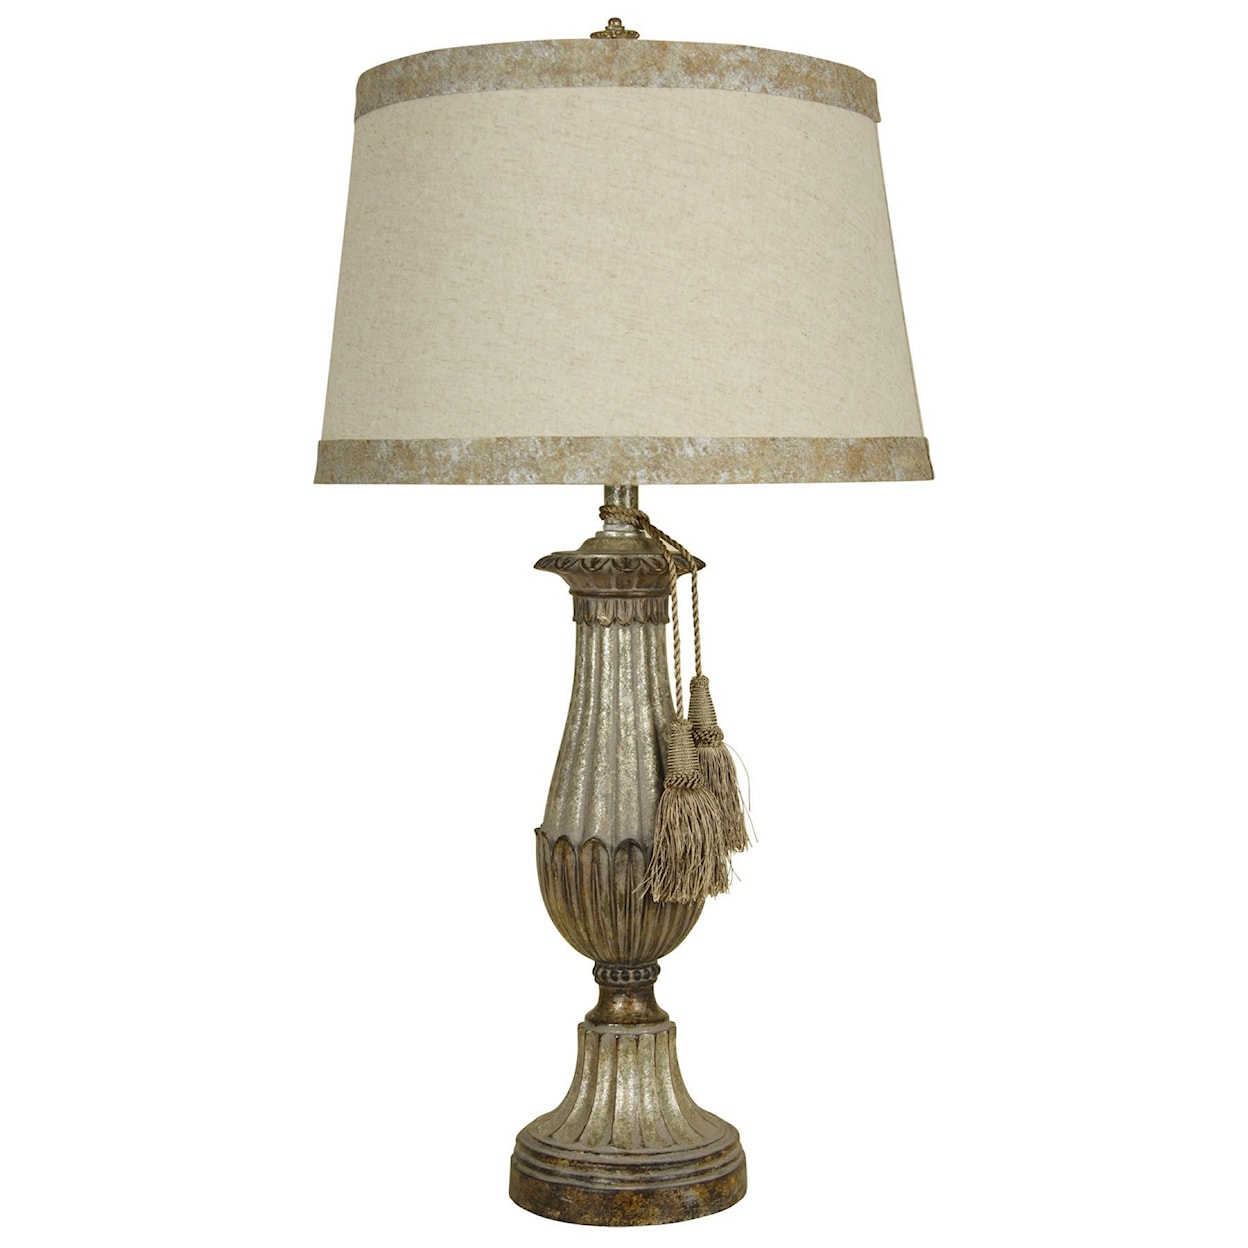 StyleCraft Lamps This Classic Table Lamp